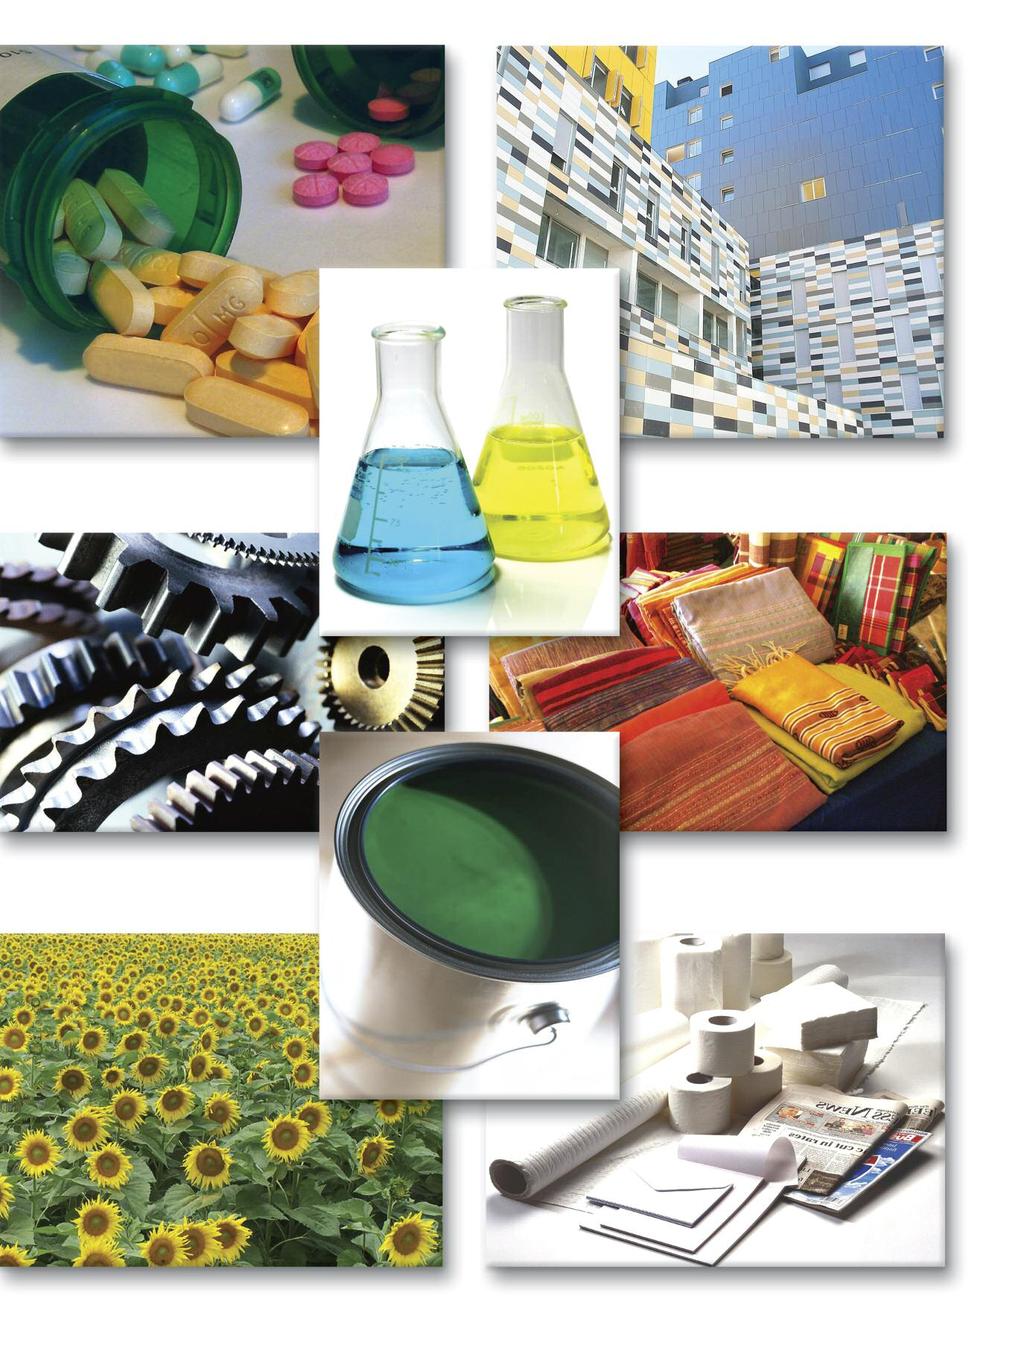 Field of use pharmaceutical ceramic industry mechanical industry